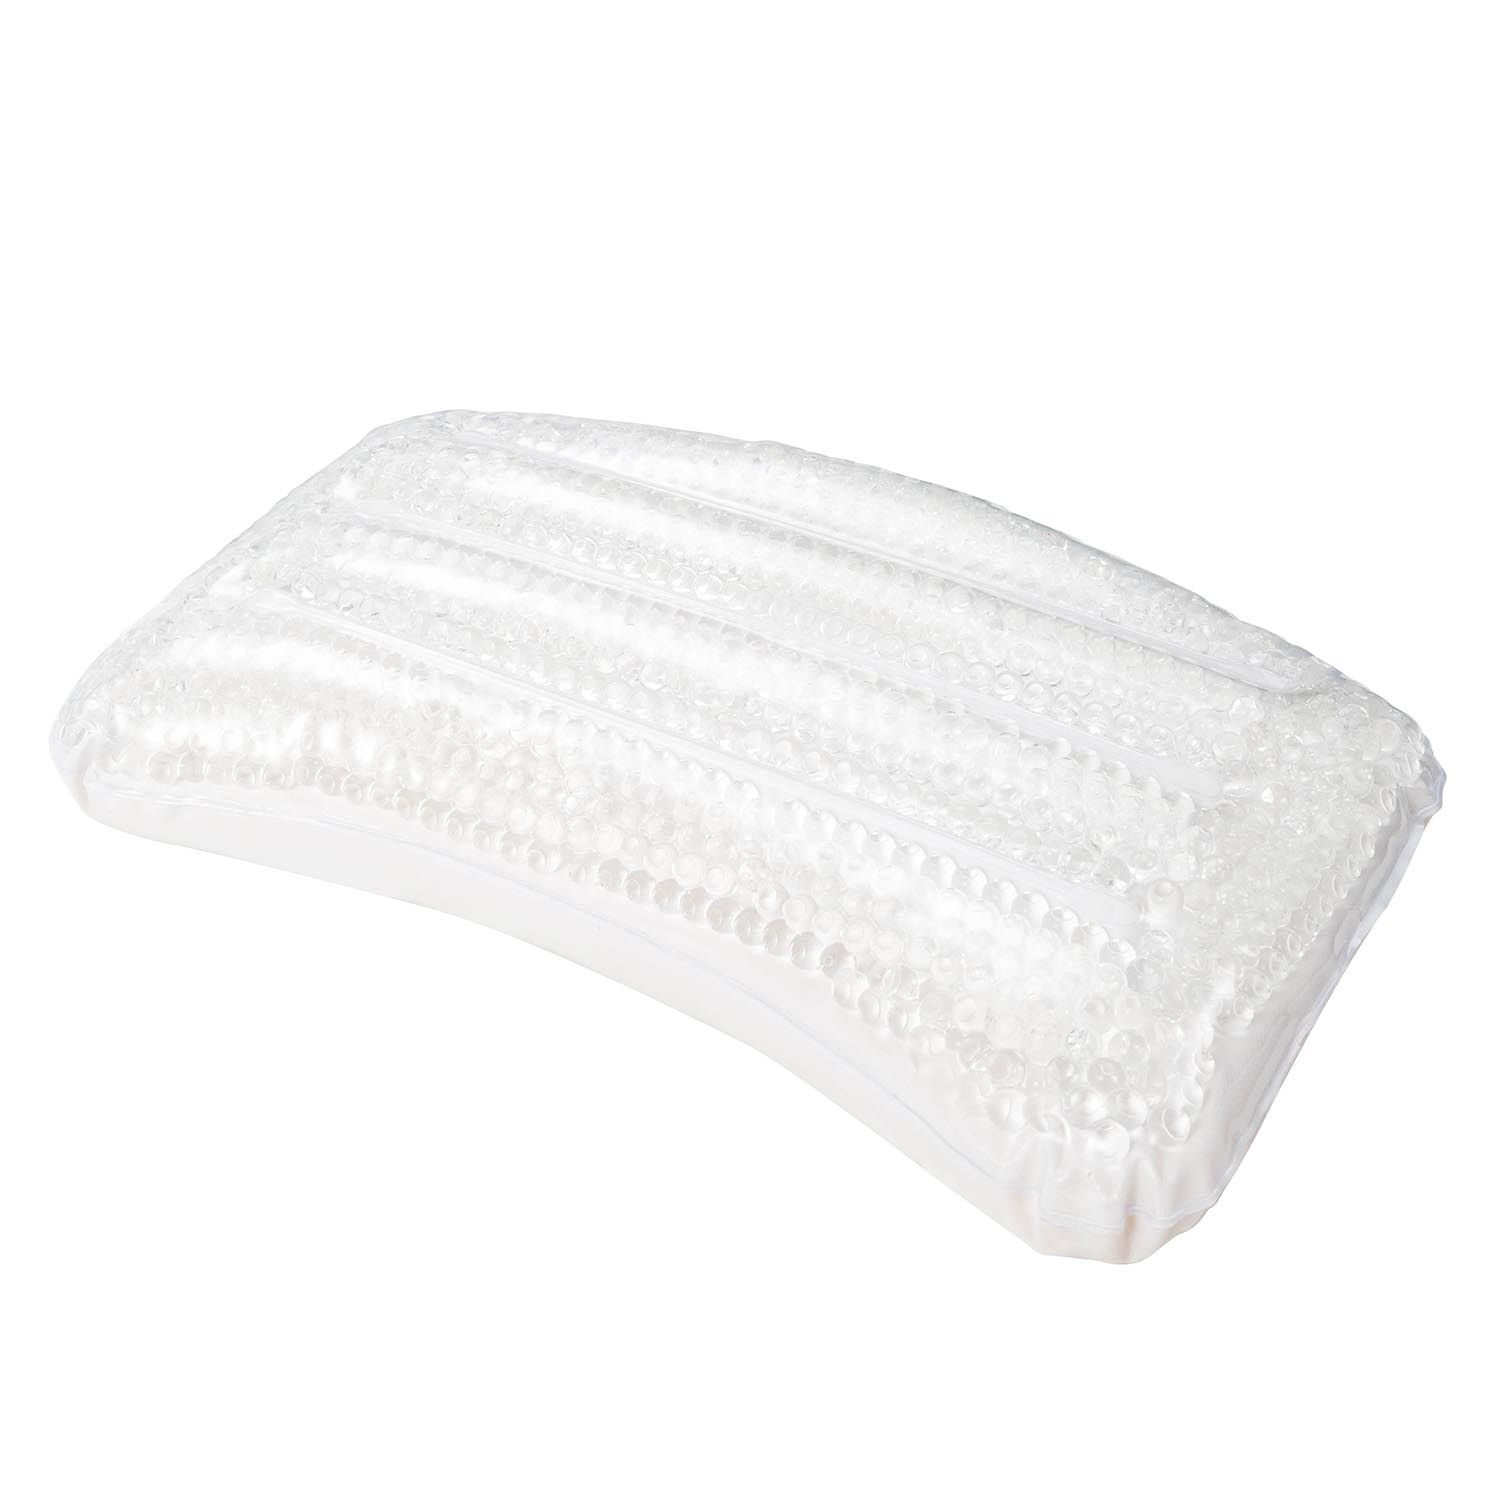 Soothing Gel Bath Pillow - Clear Image 2